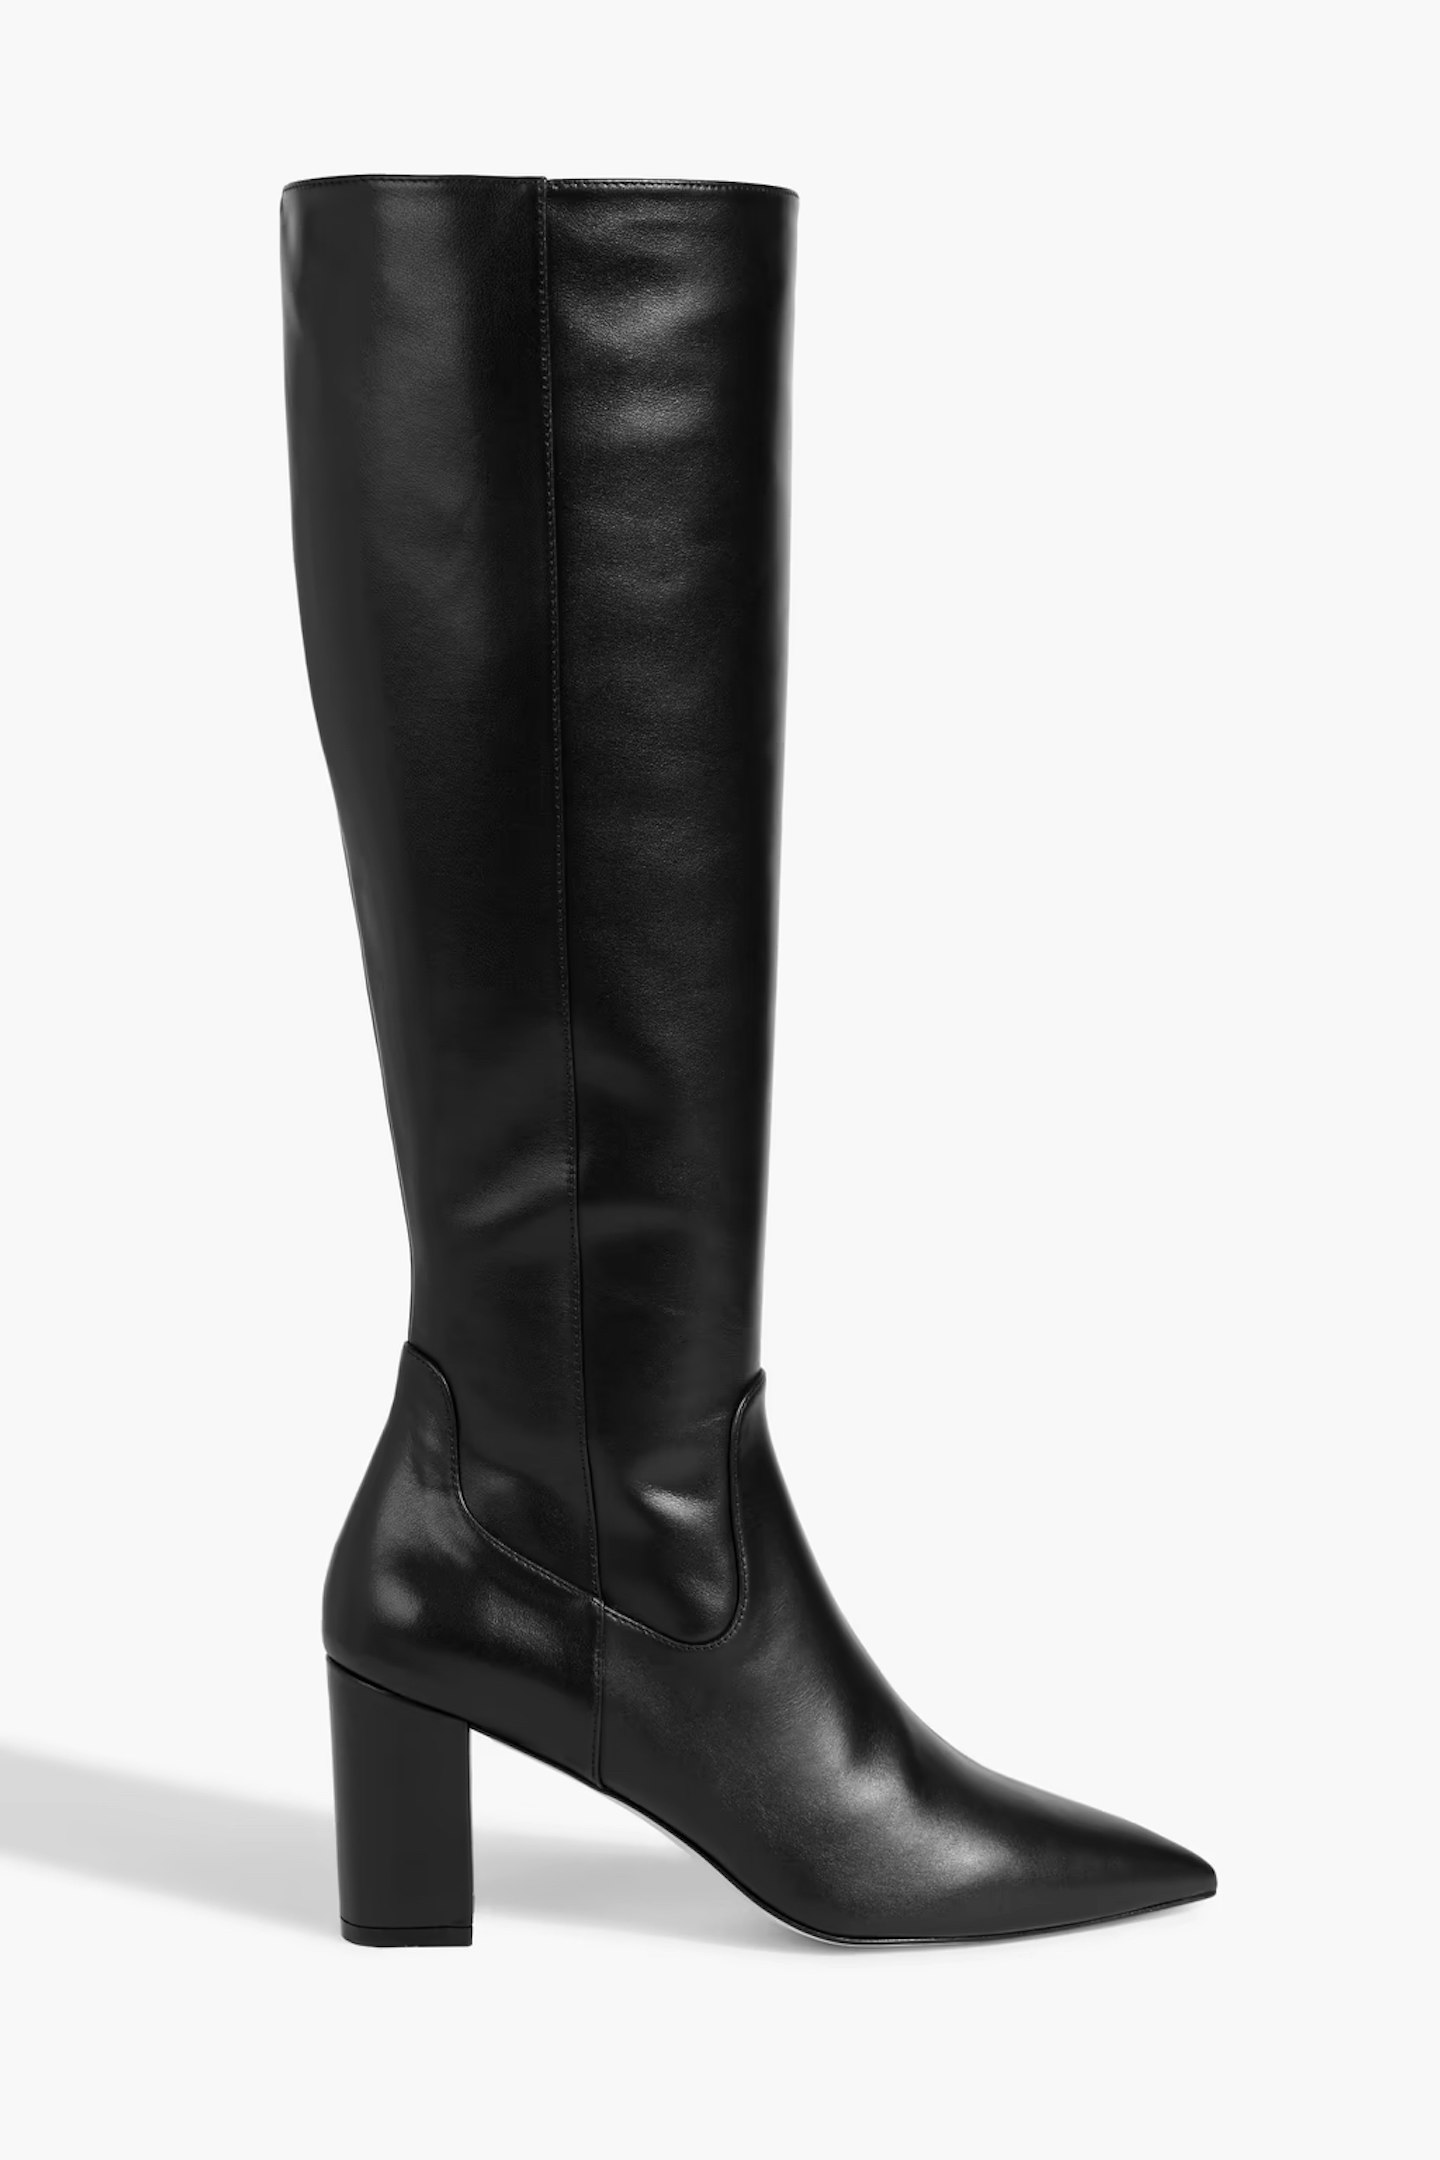 Boots Bare 7 Denier Knee High Natural - Compare Prices & Where To